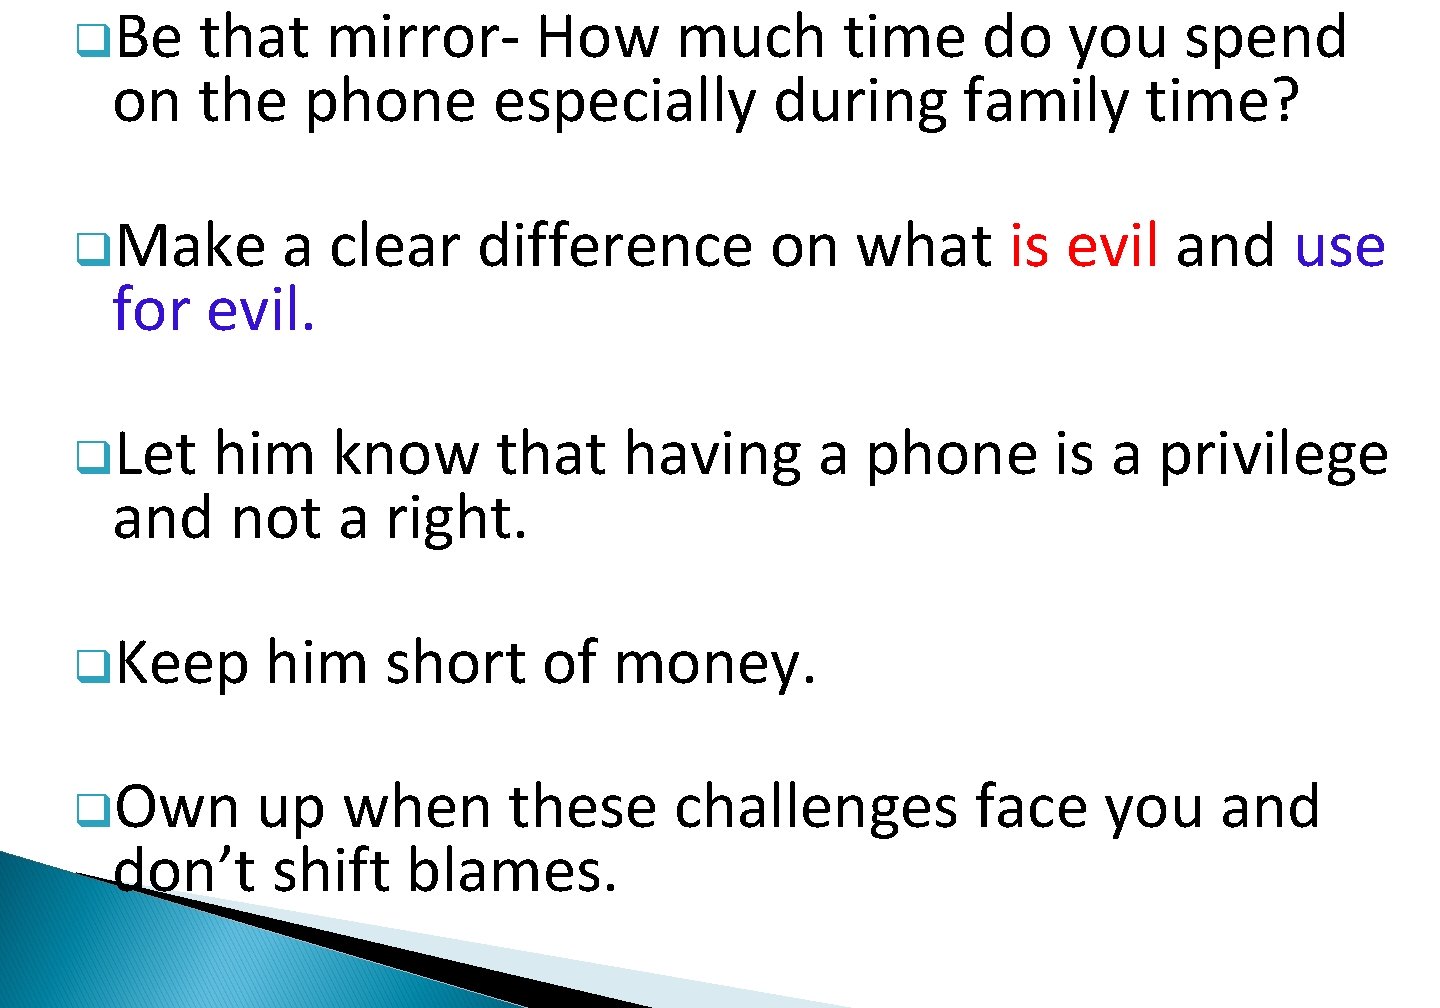 q. Be that mirror- How much time do you spend on the phone especially